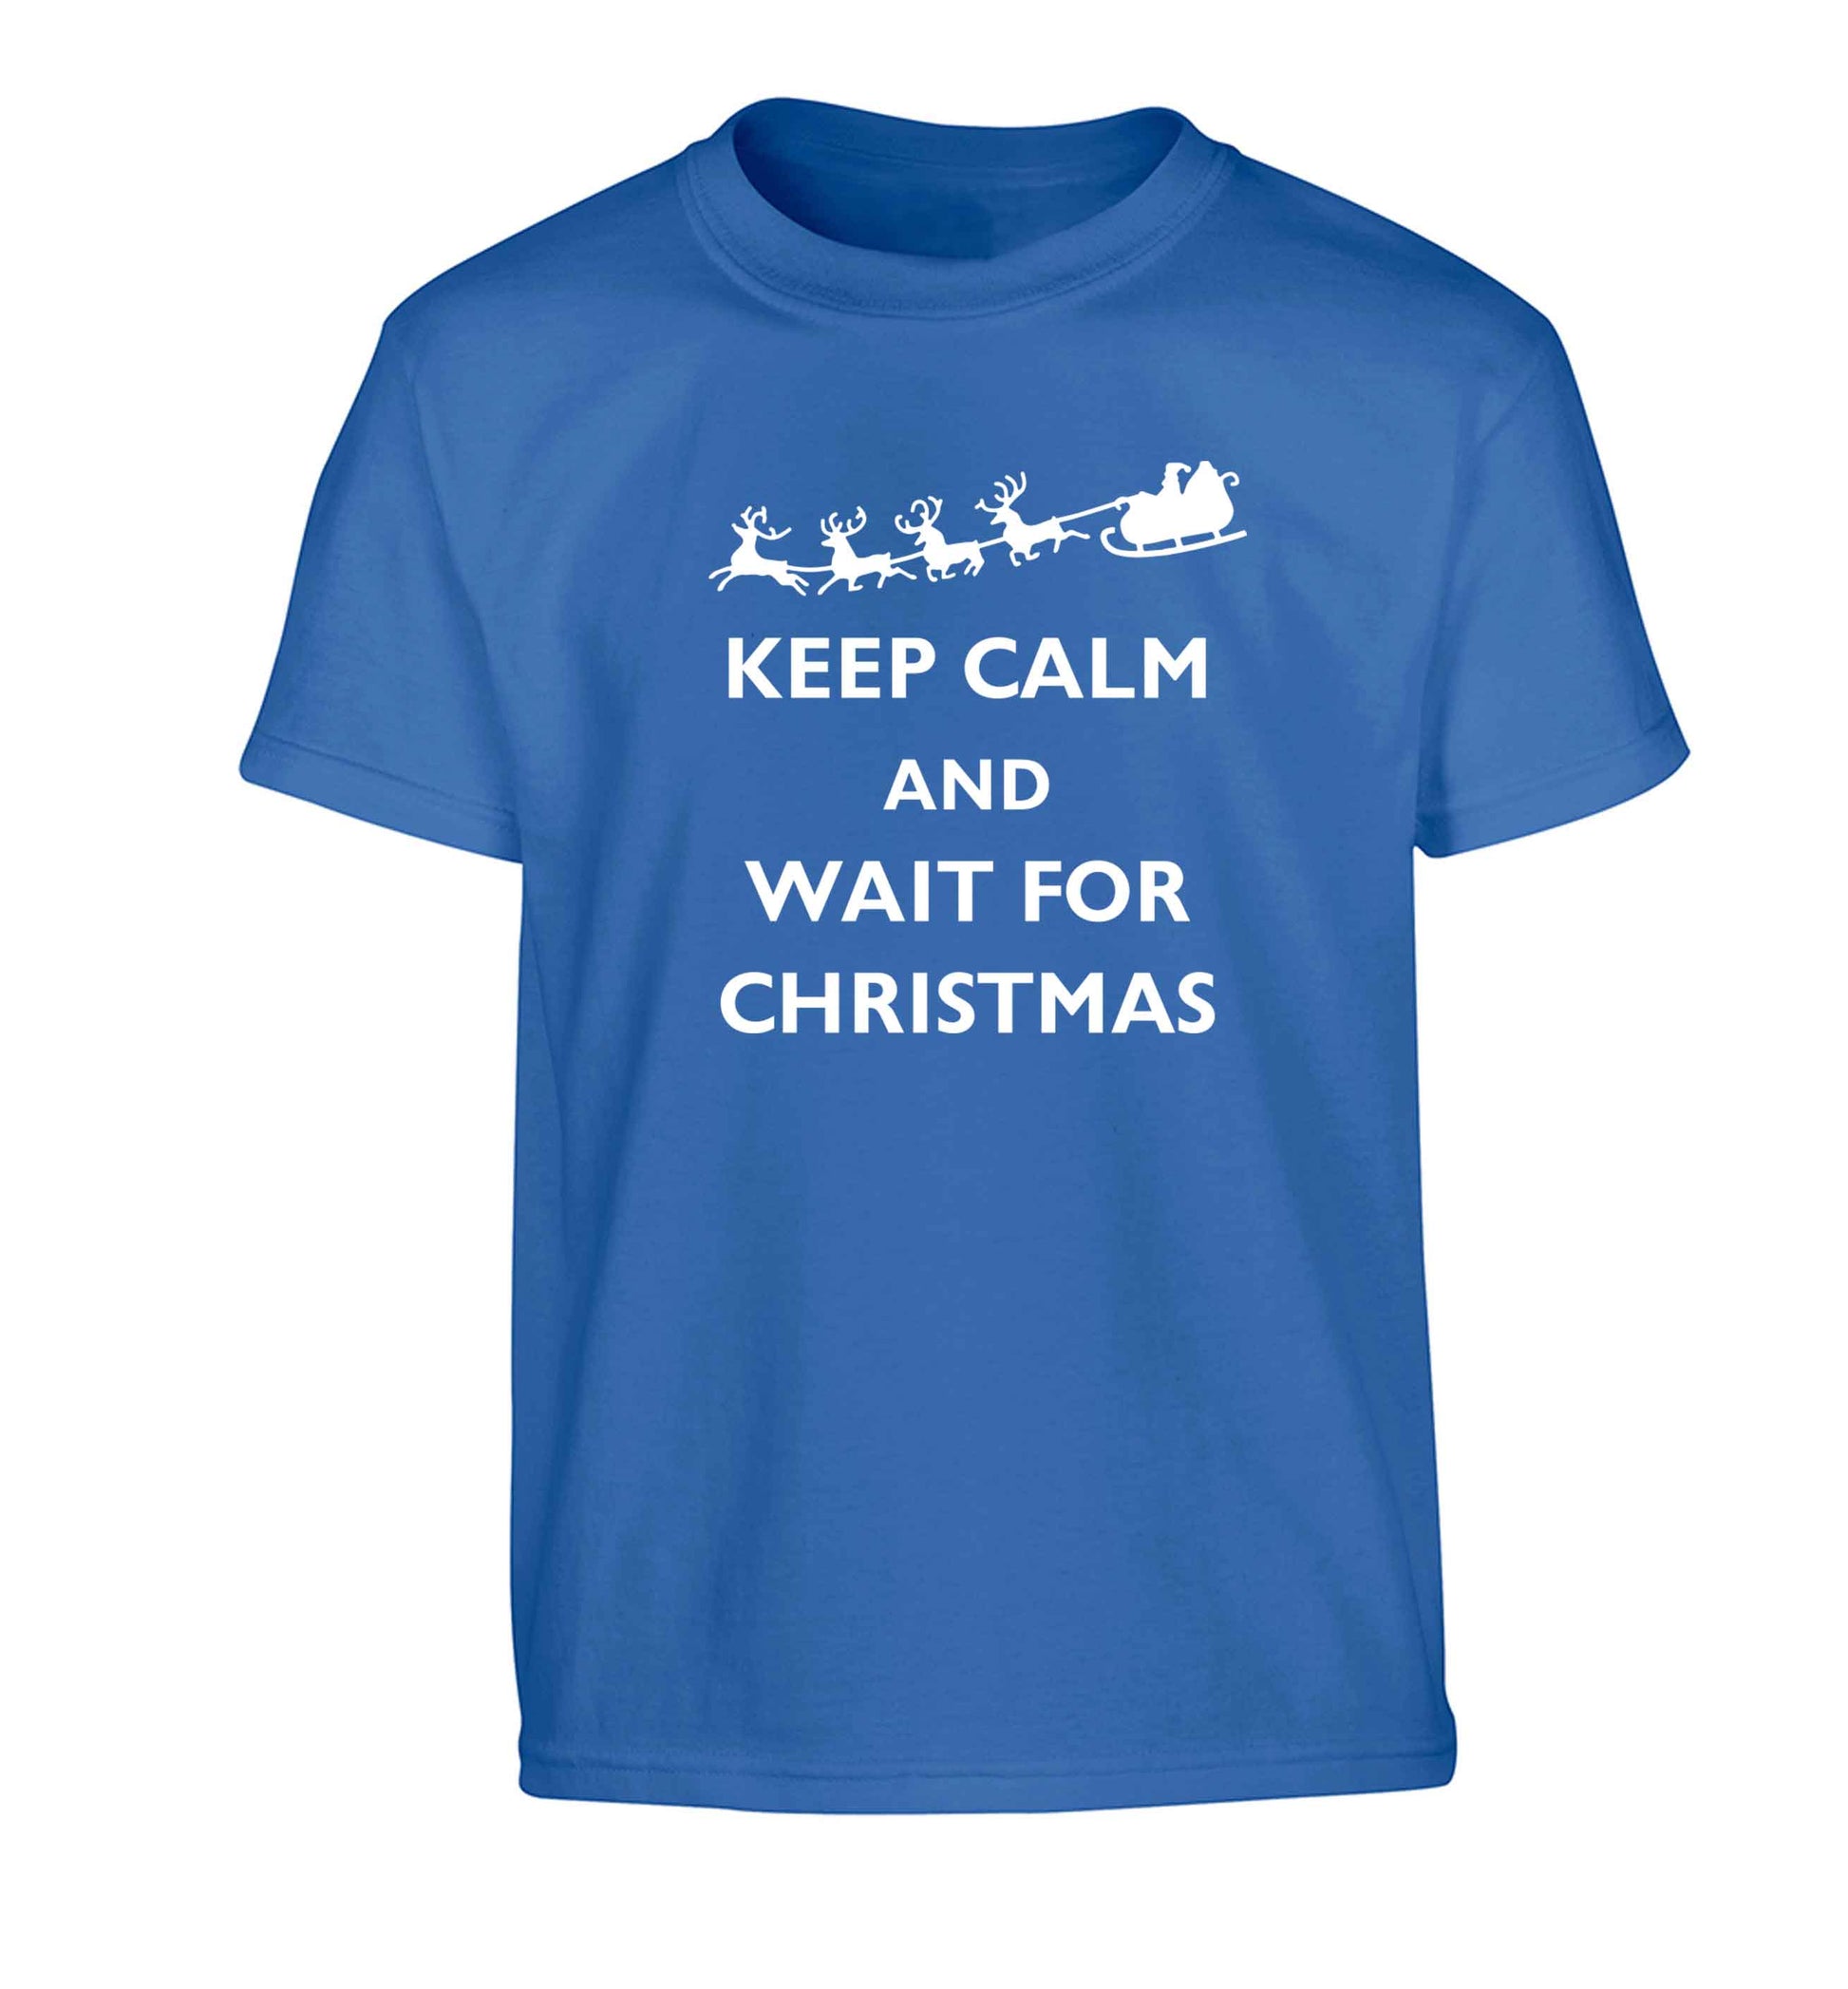 Keep calm and wait for Christmas Children's blue Tshirt 12-13 Years